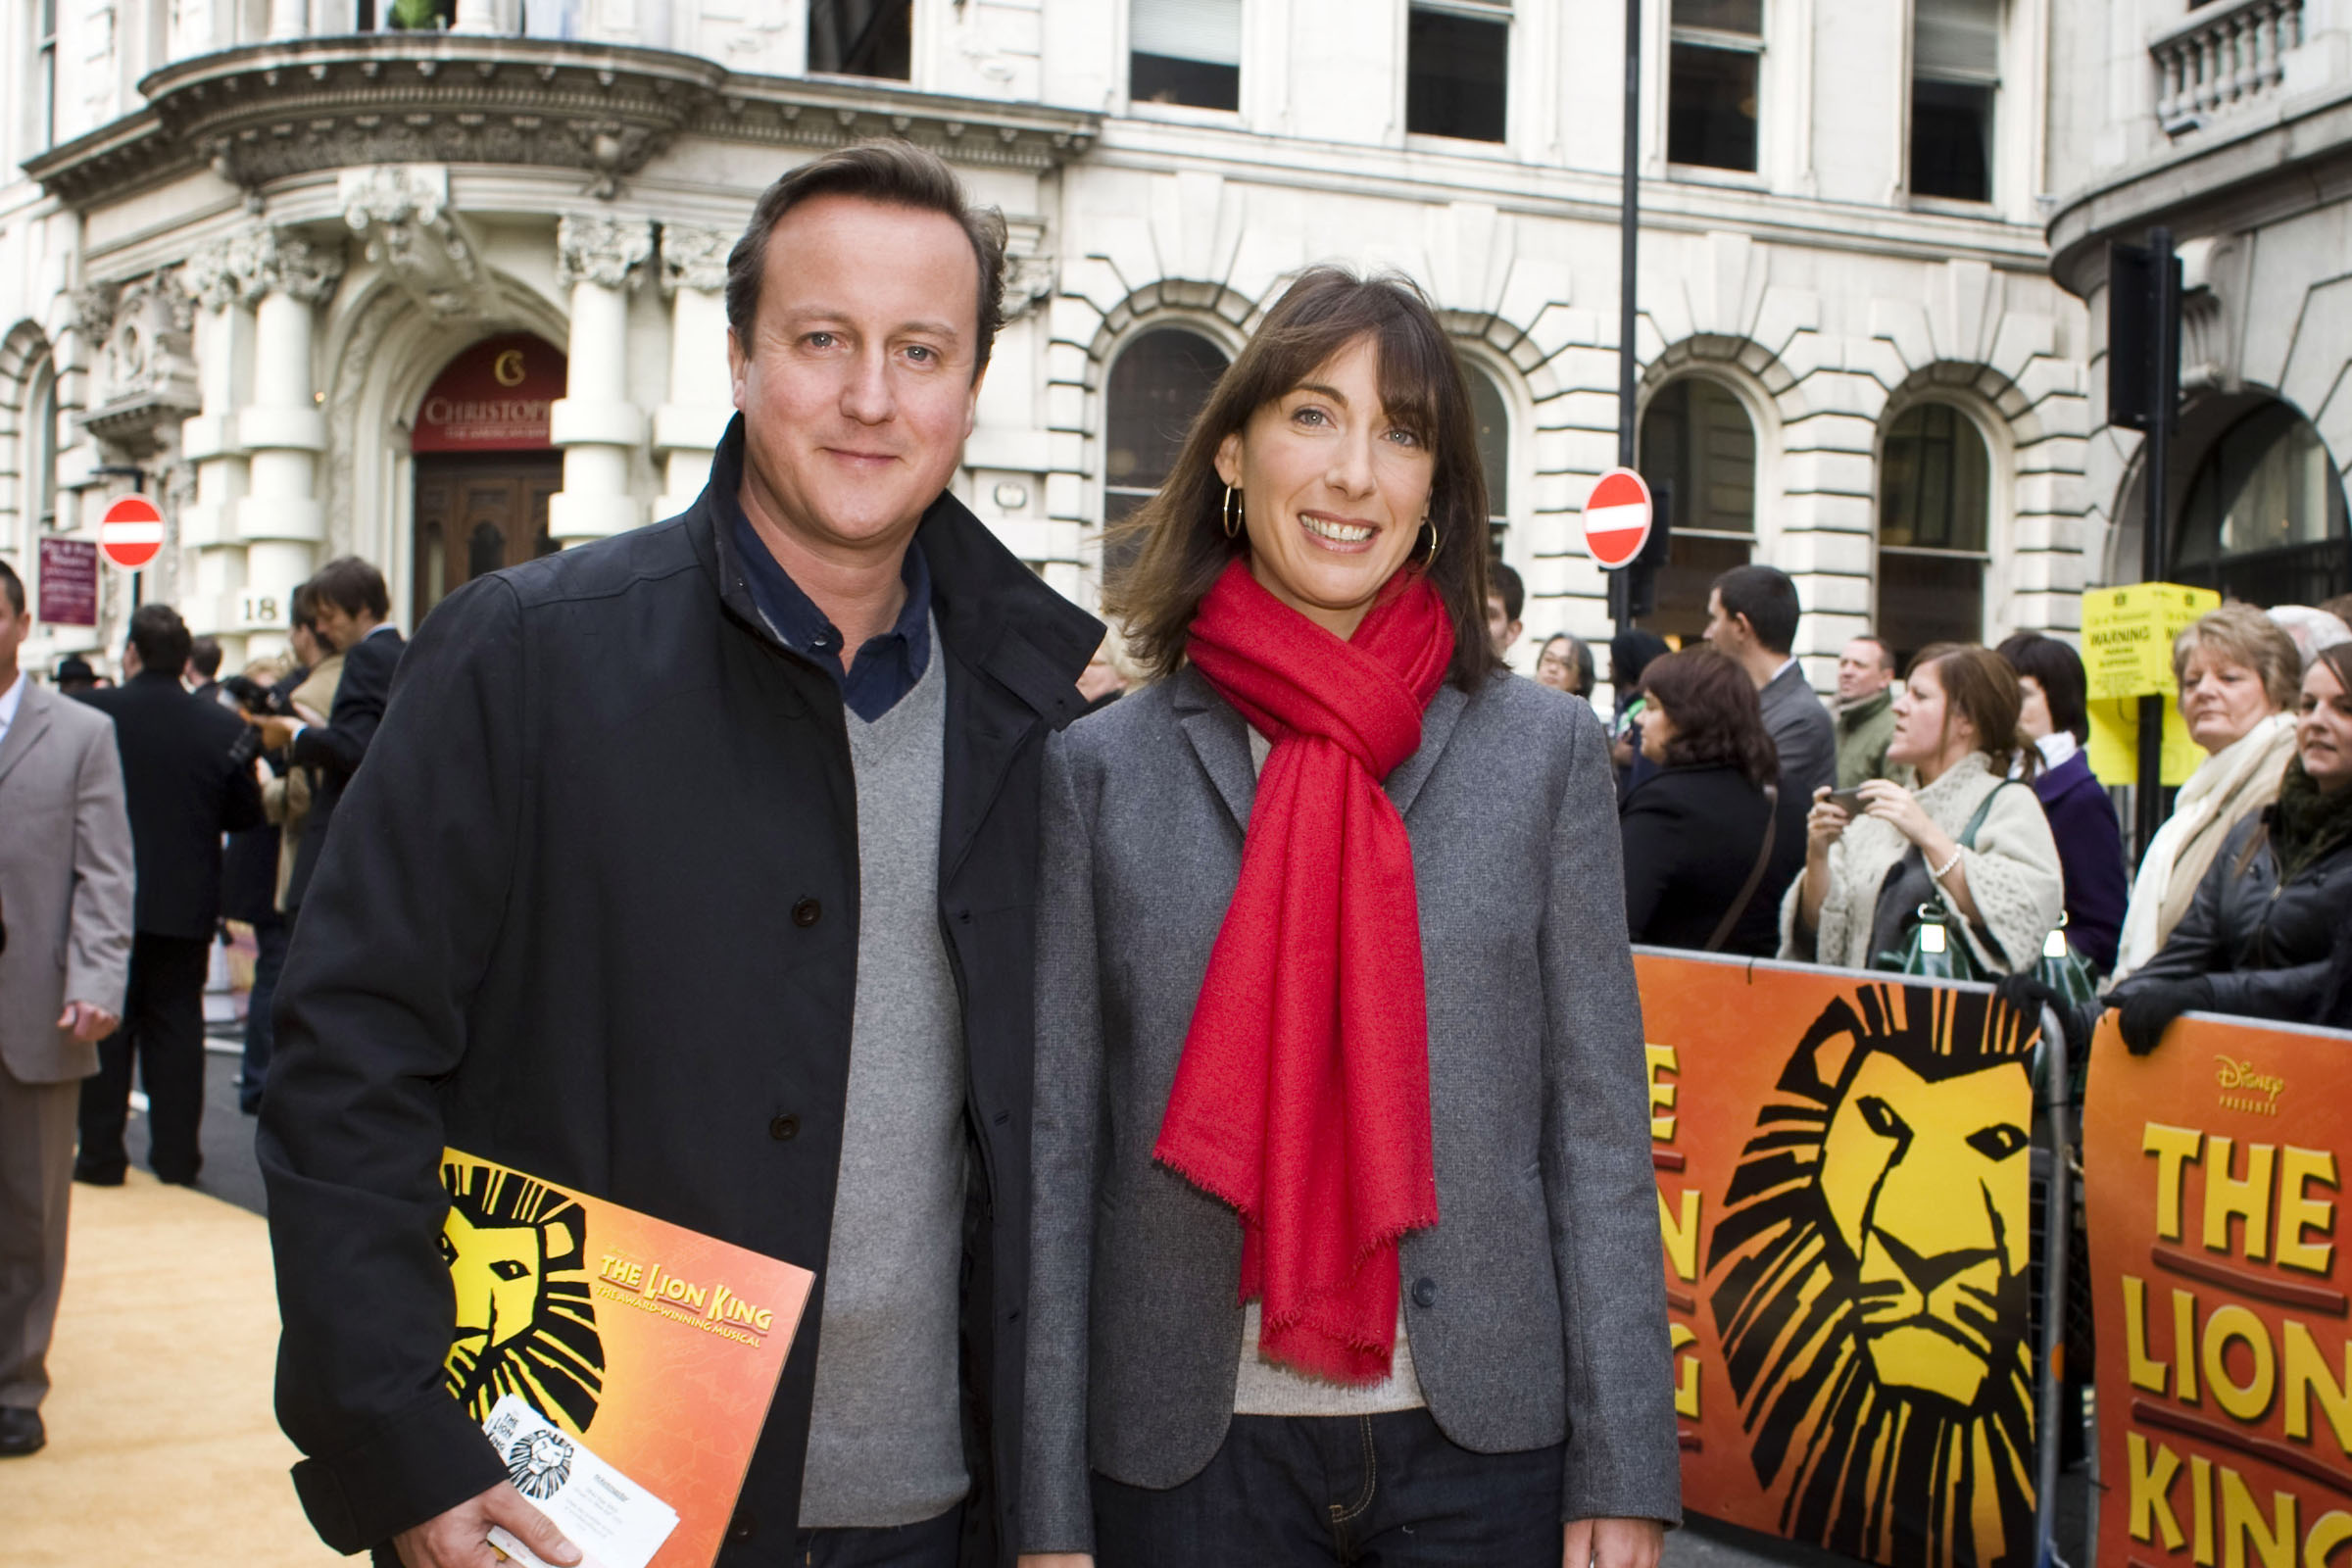 David Cameron and Wife Samantha Cameron attend the 10th Anniversary showing of The Lion King at the Lyceum Theatre in London